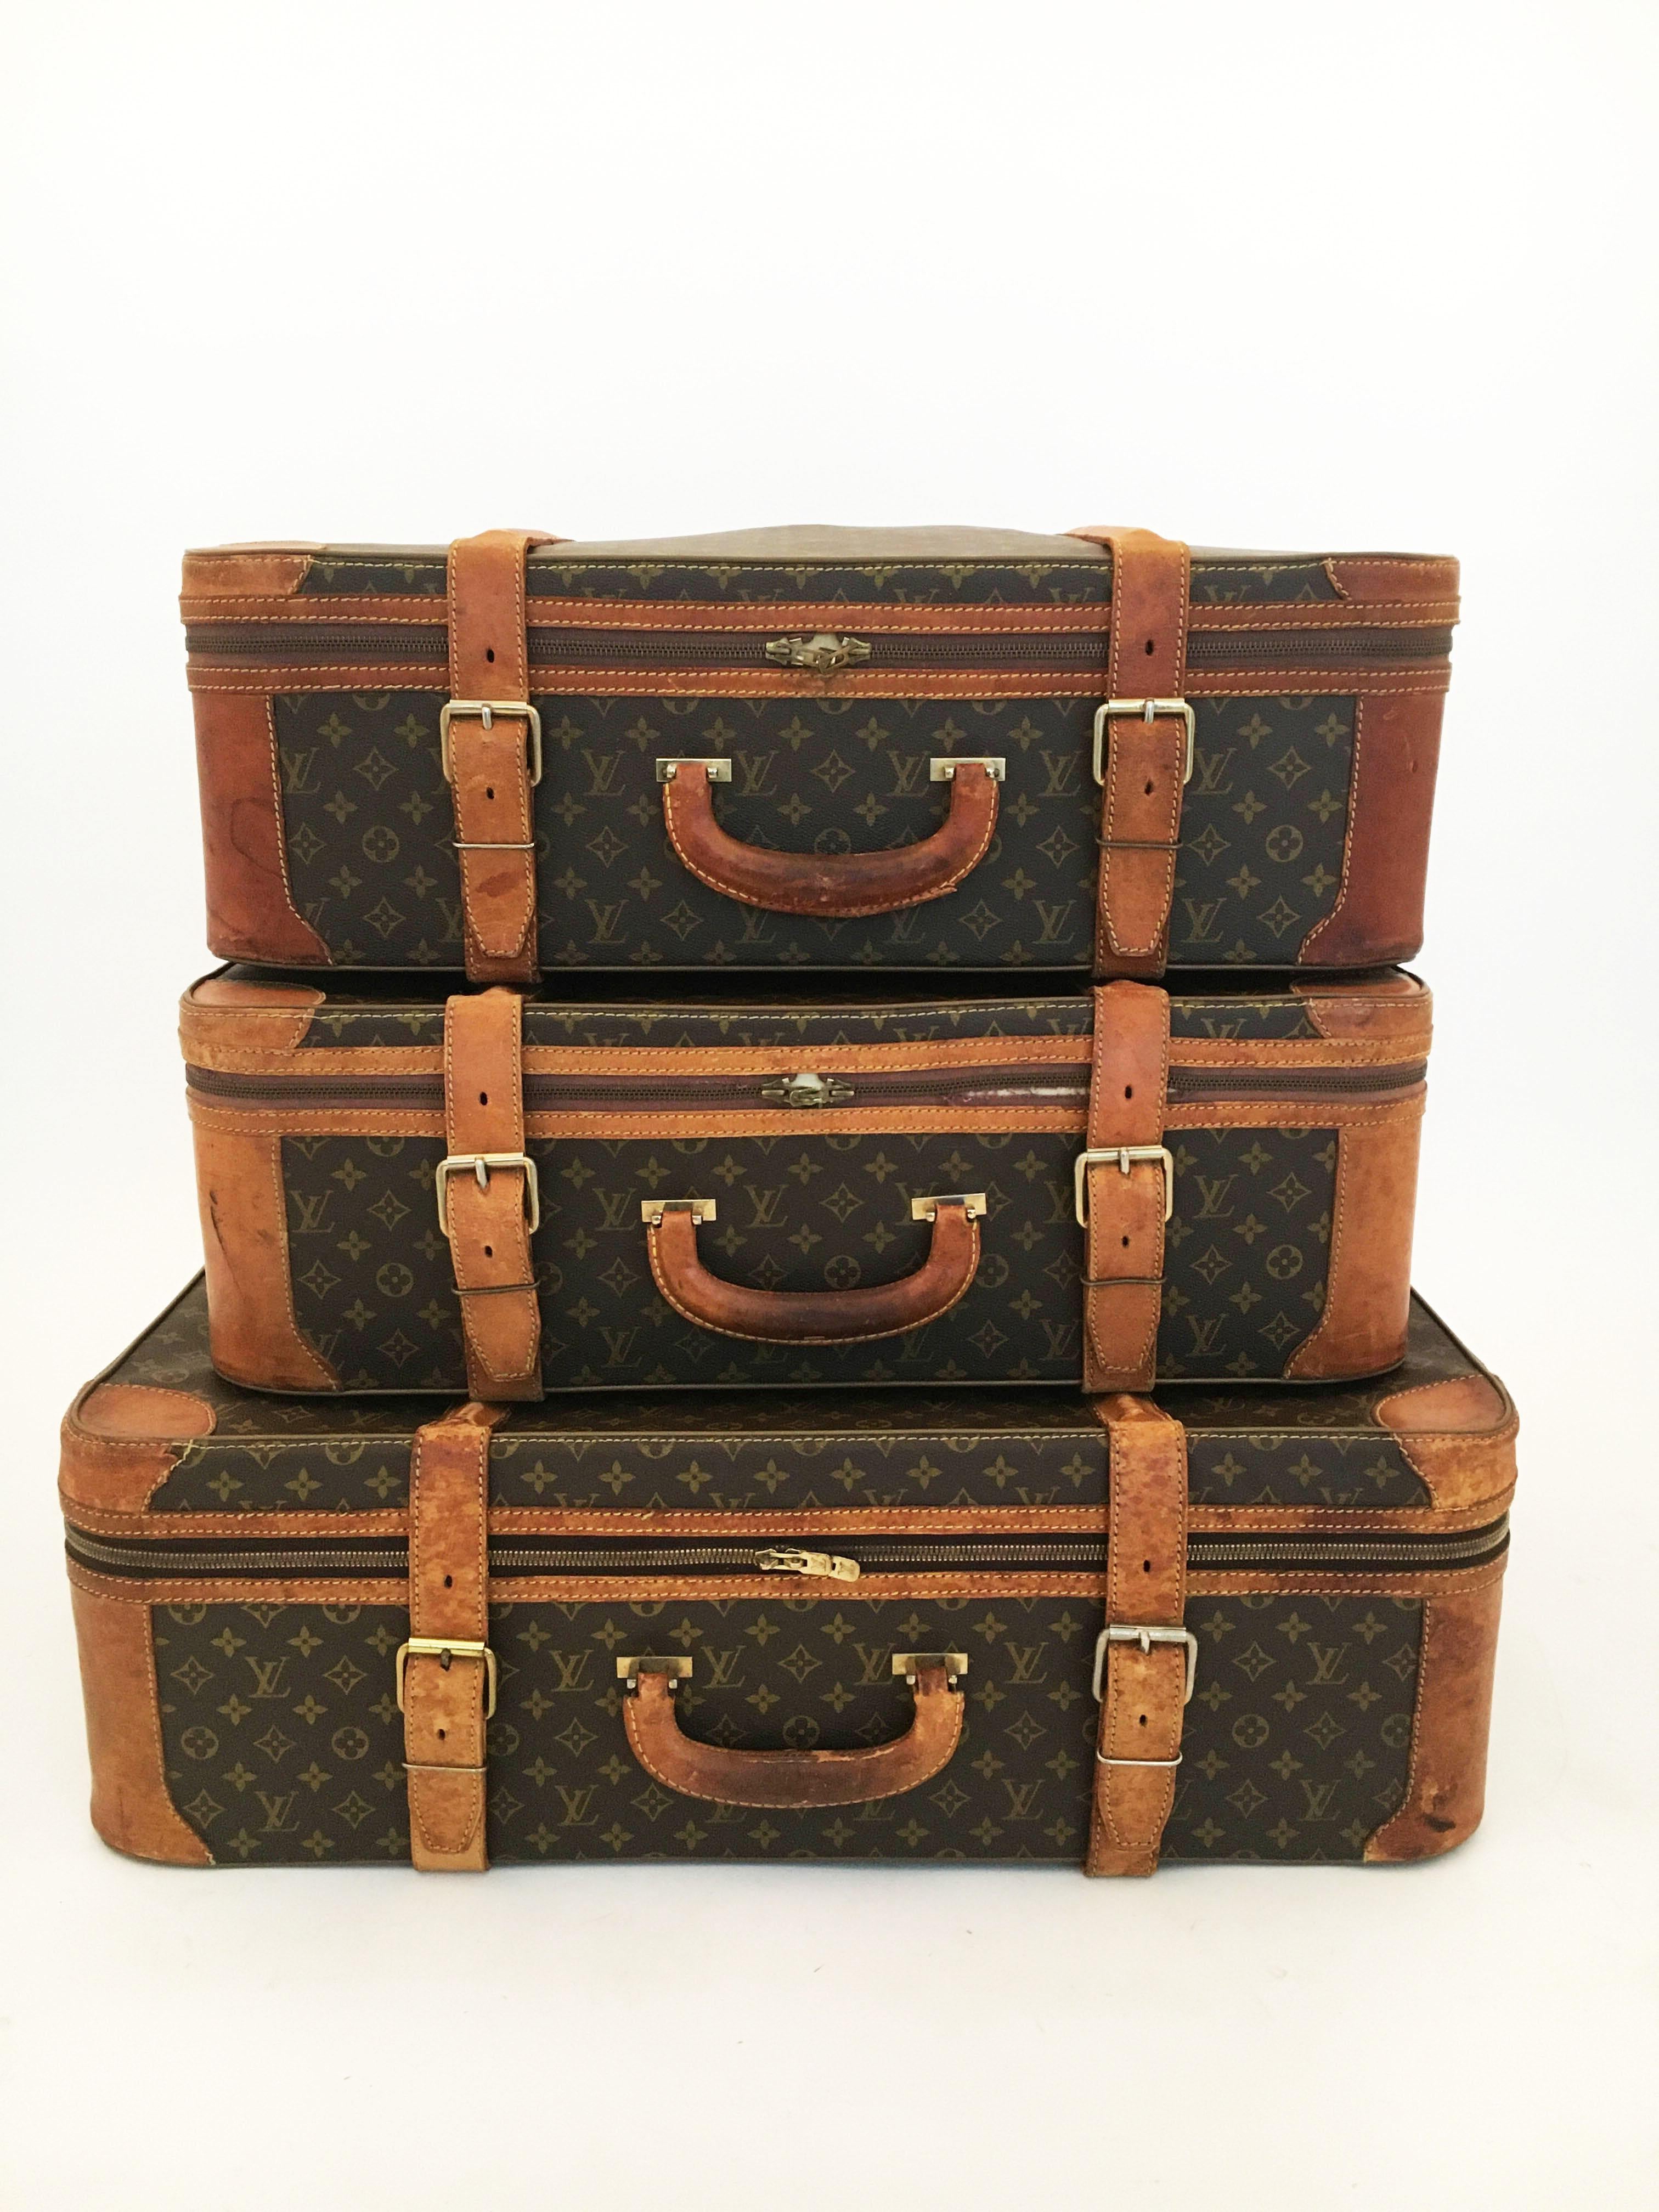 Original vintage Stratos Louis Vuitton luggage trunk stack, 80 cm, 70 cm & 70 cm, likely made in the 1970s. The Louis Vuitton Stratos Luggage is a semi-flexible series with rigid frame. Corners, handle, reinforcement strips and bottom in natural